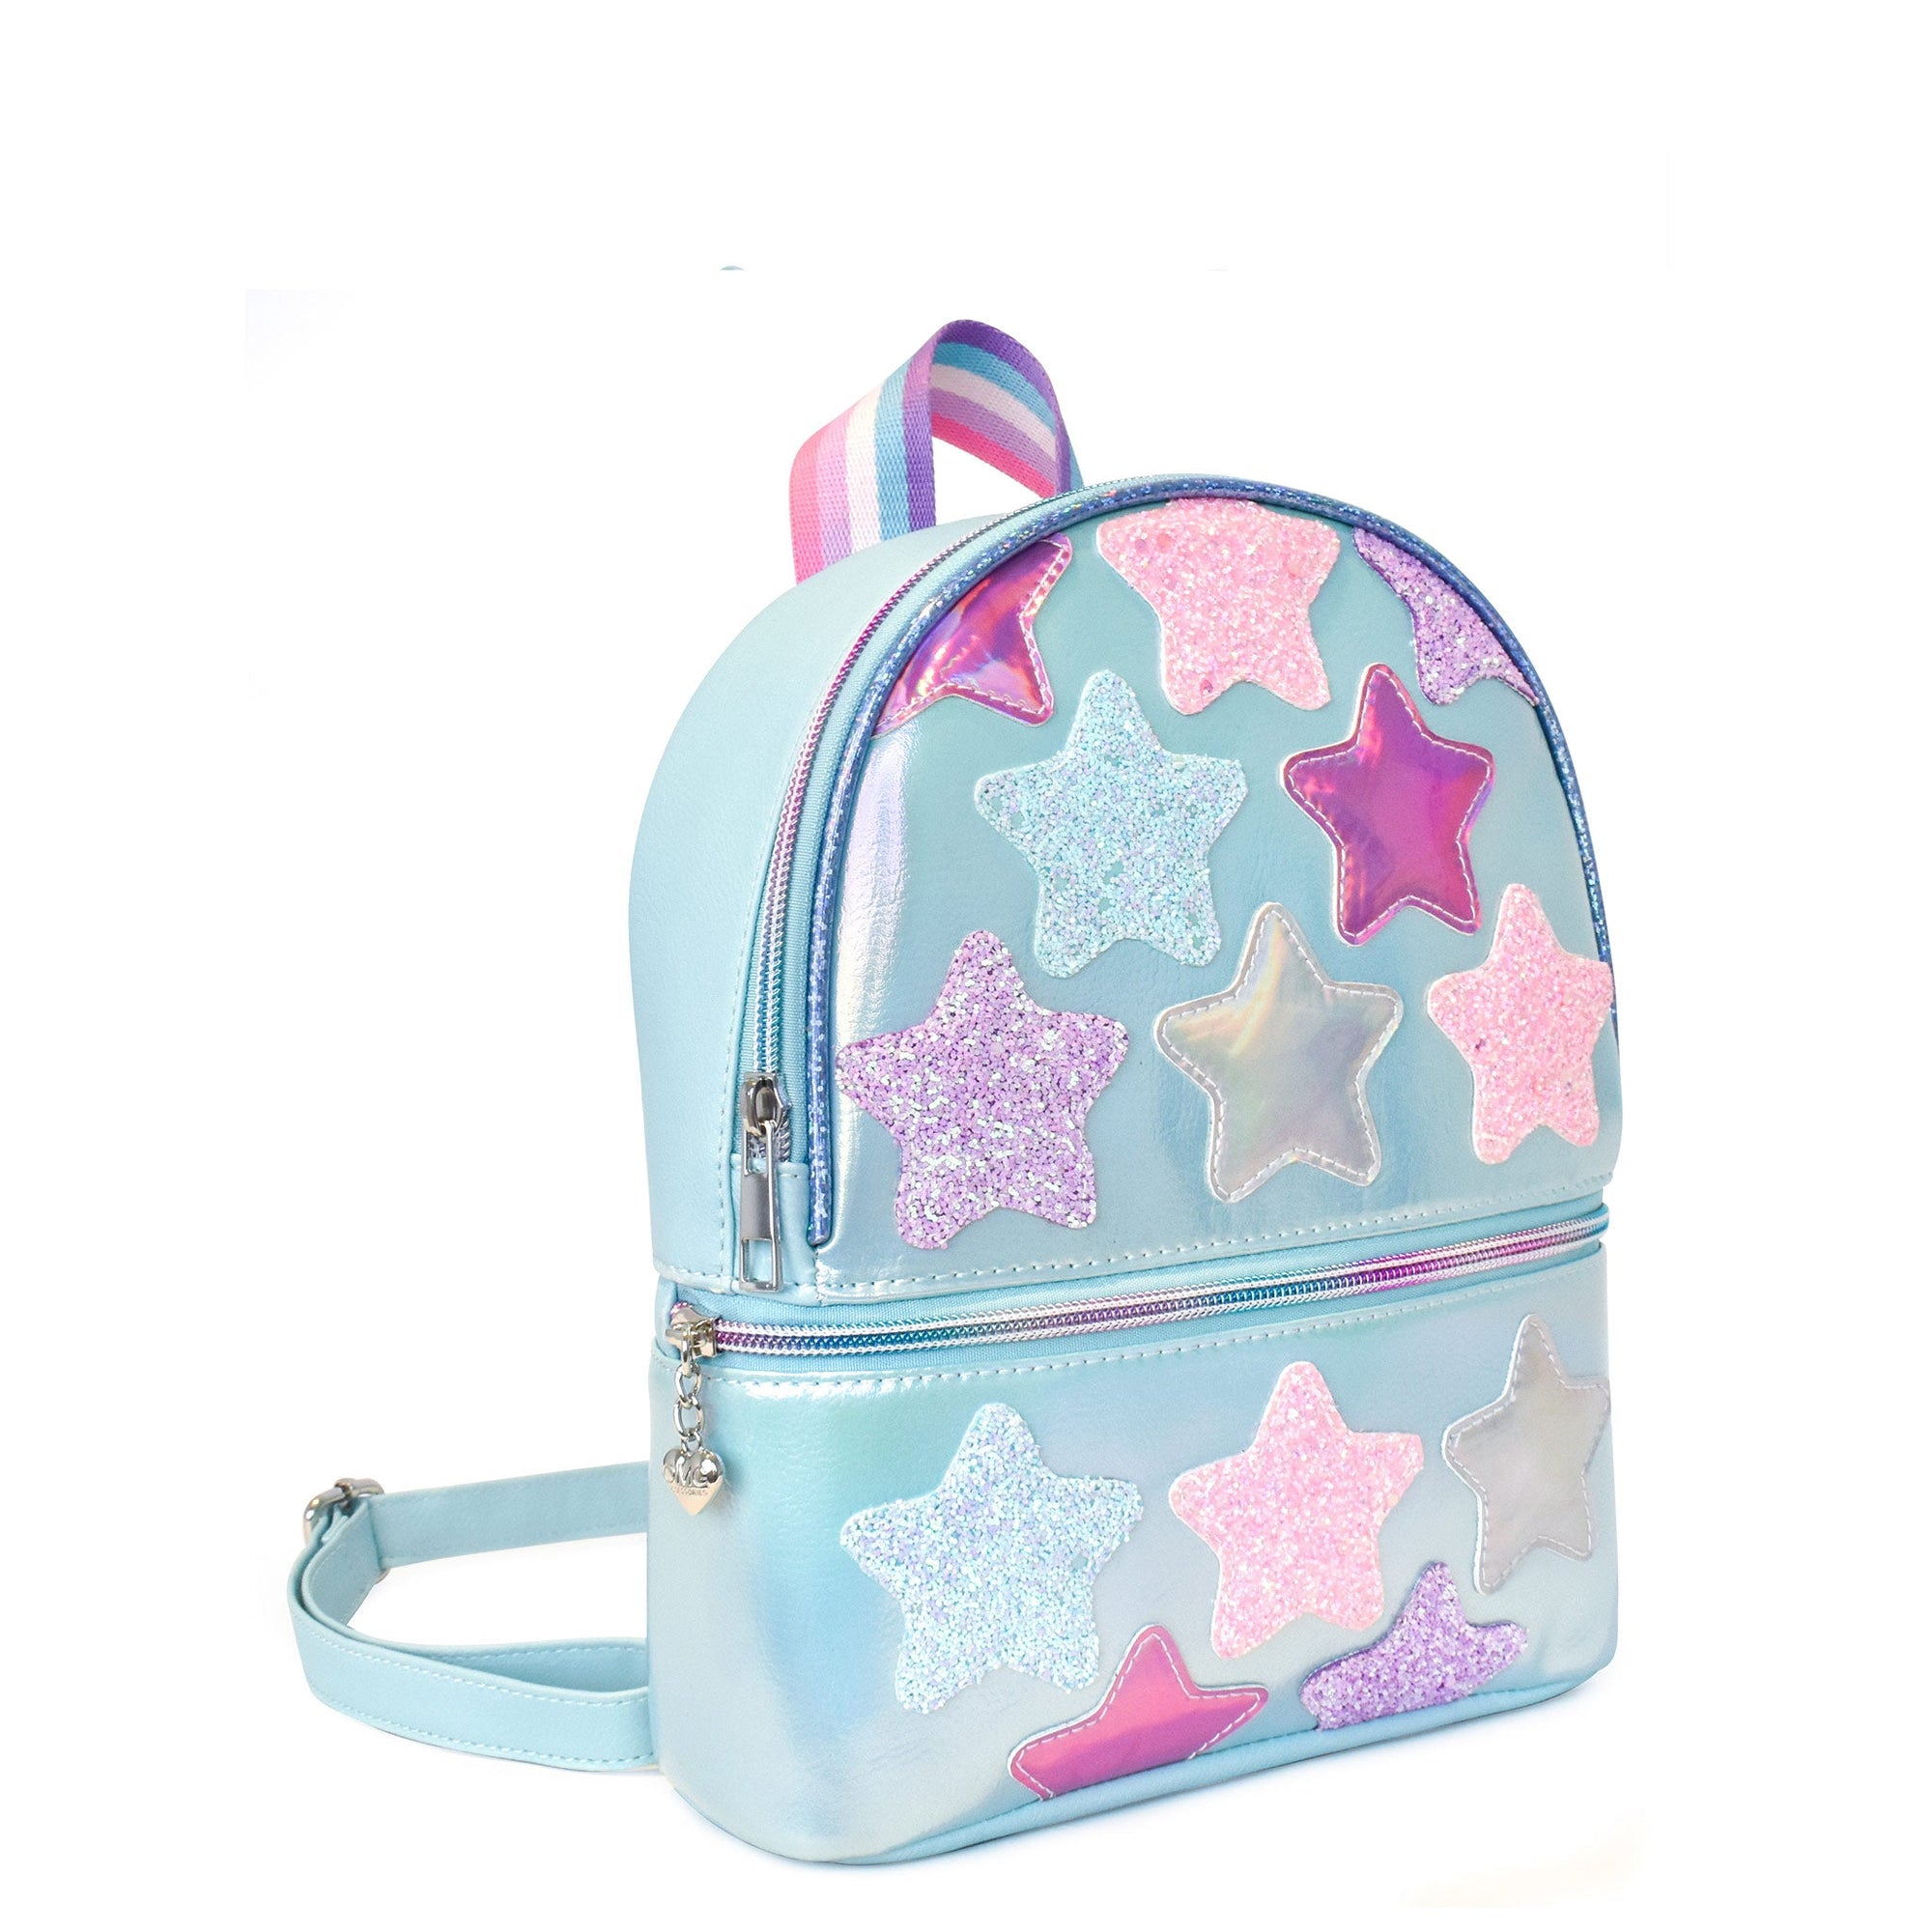 Star-Patched Metallic Light Blue Mini Backpack